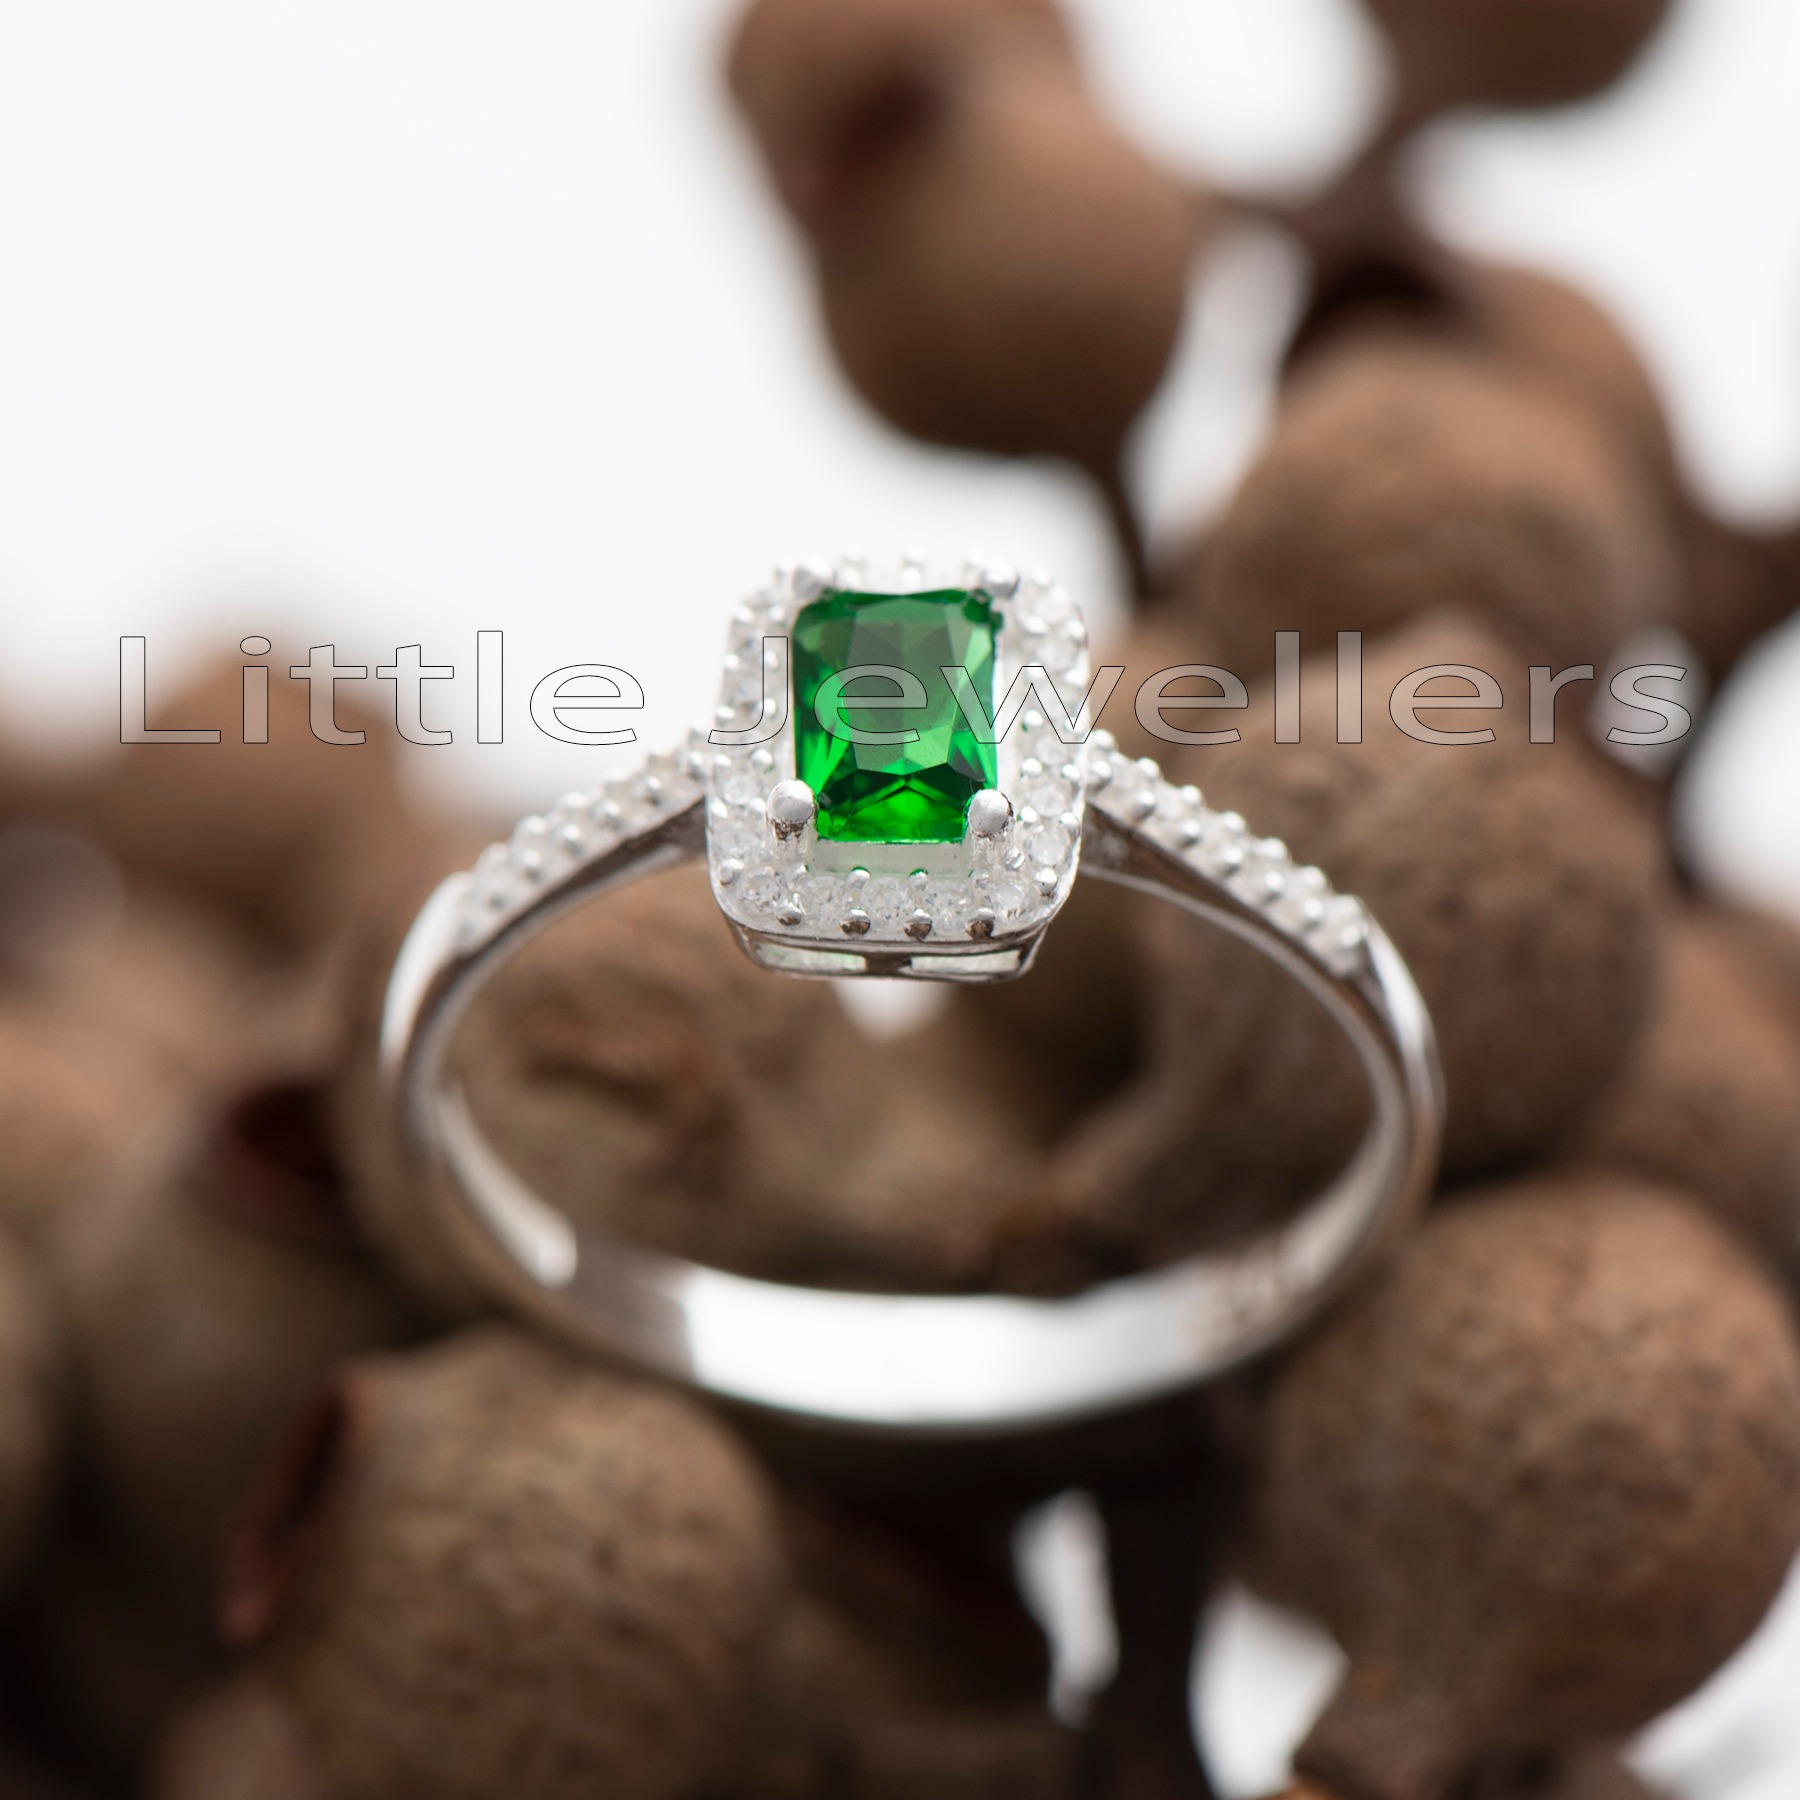 This stunning silver ring with a vibrant green stone is the perfect  birthday gift to celebrate you or a loved one's special day. Experience its  intricate design  let it be a